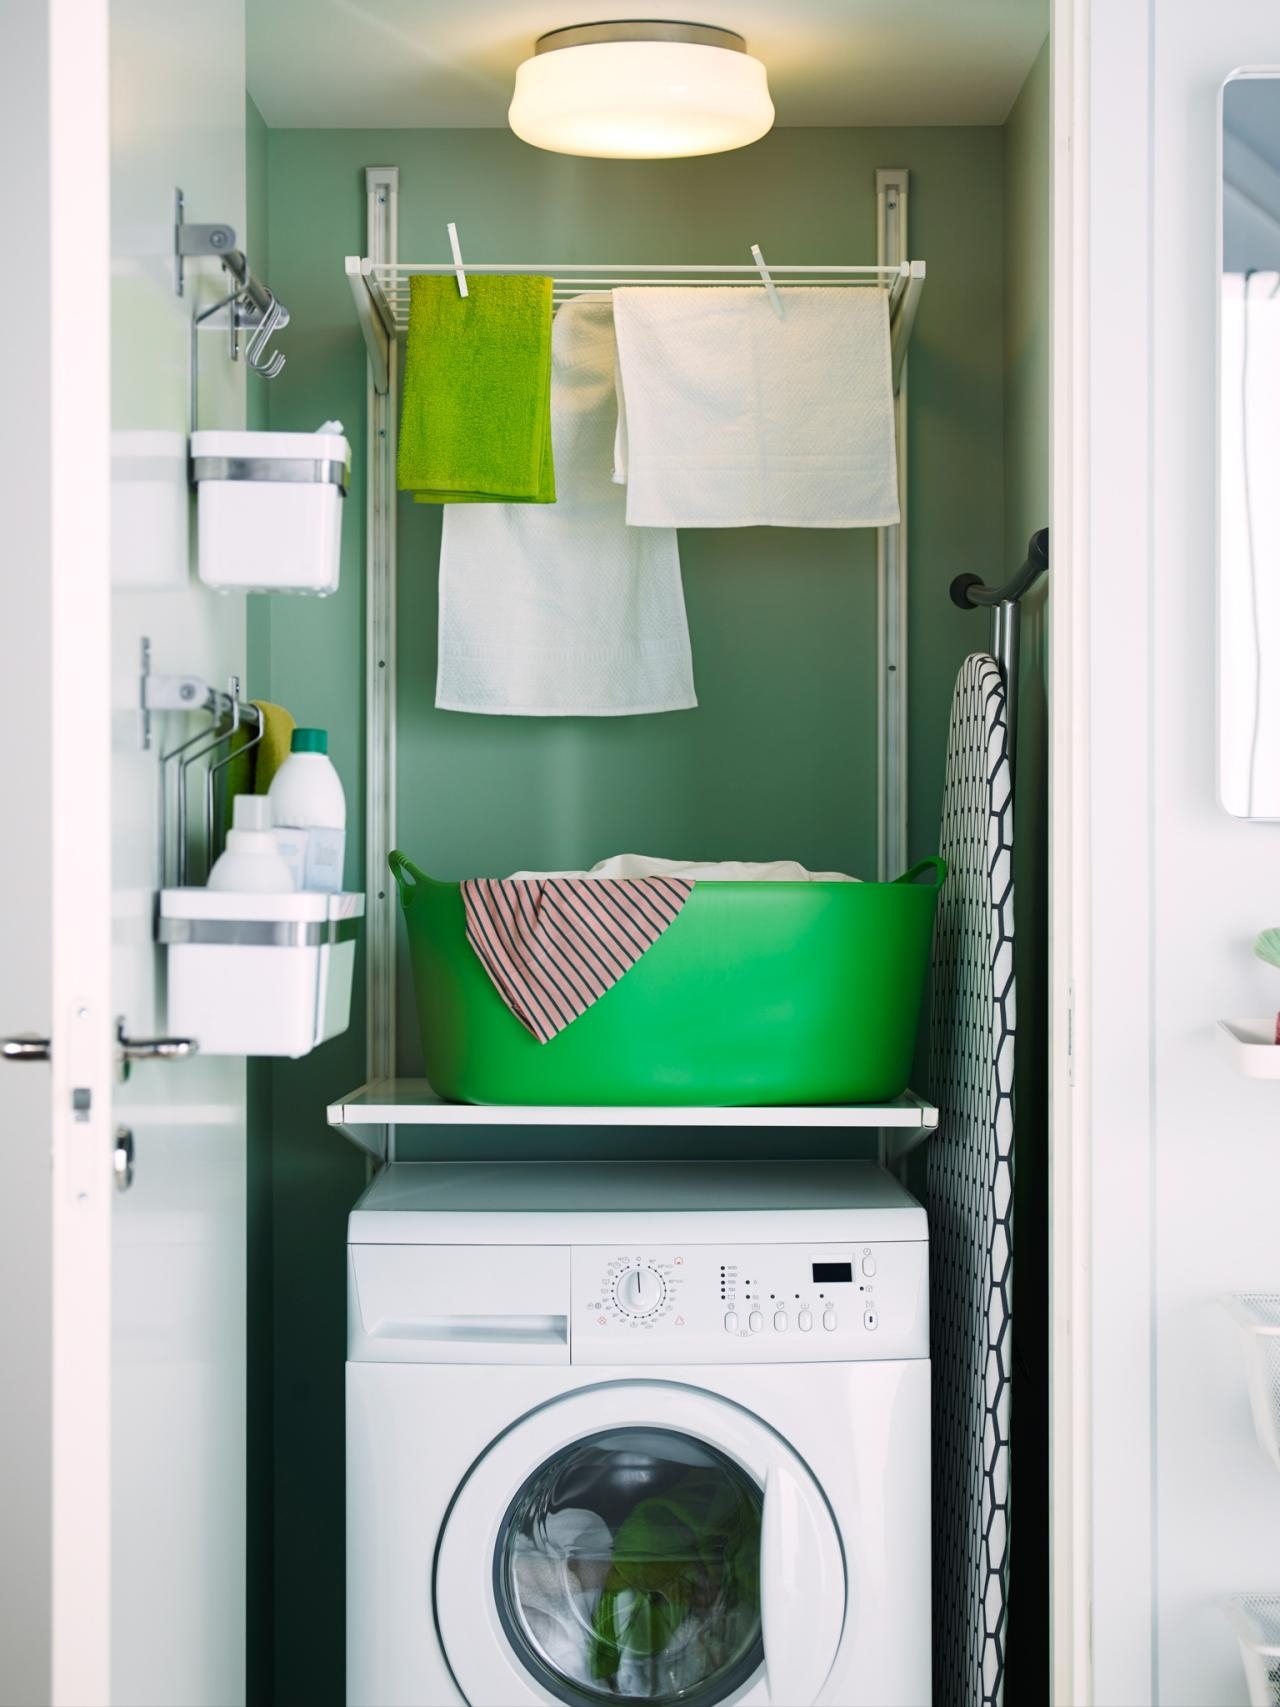 10 Perfect Laundry Room Ideas Small Space %name 2022